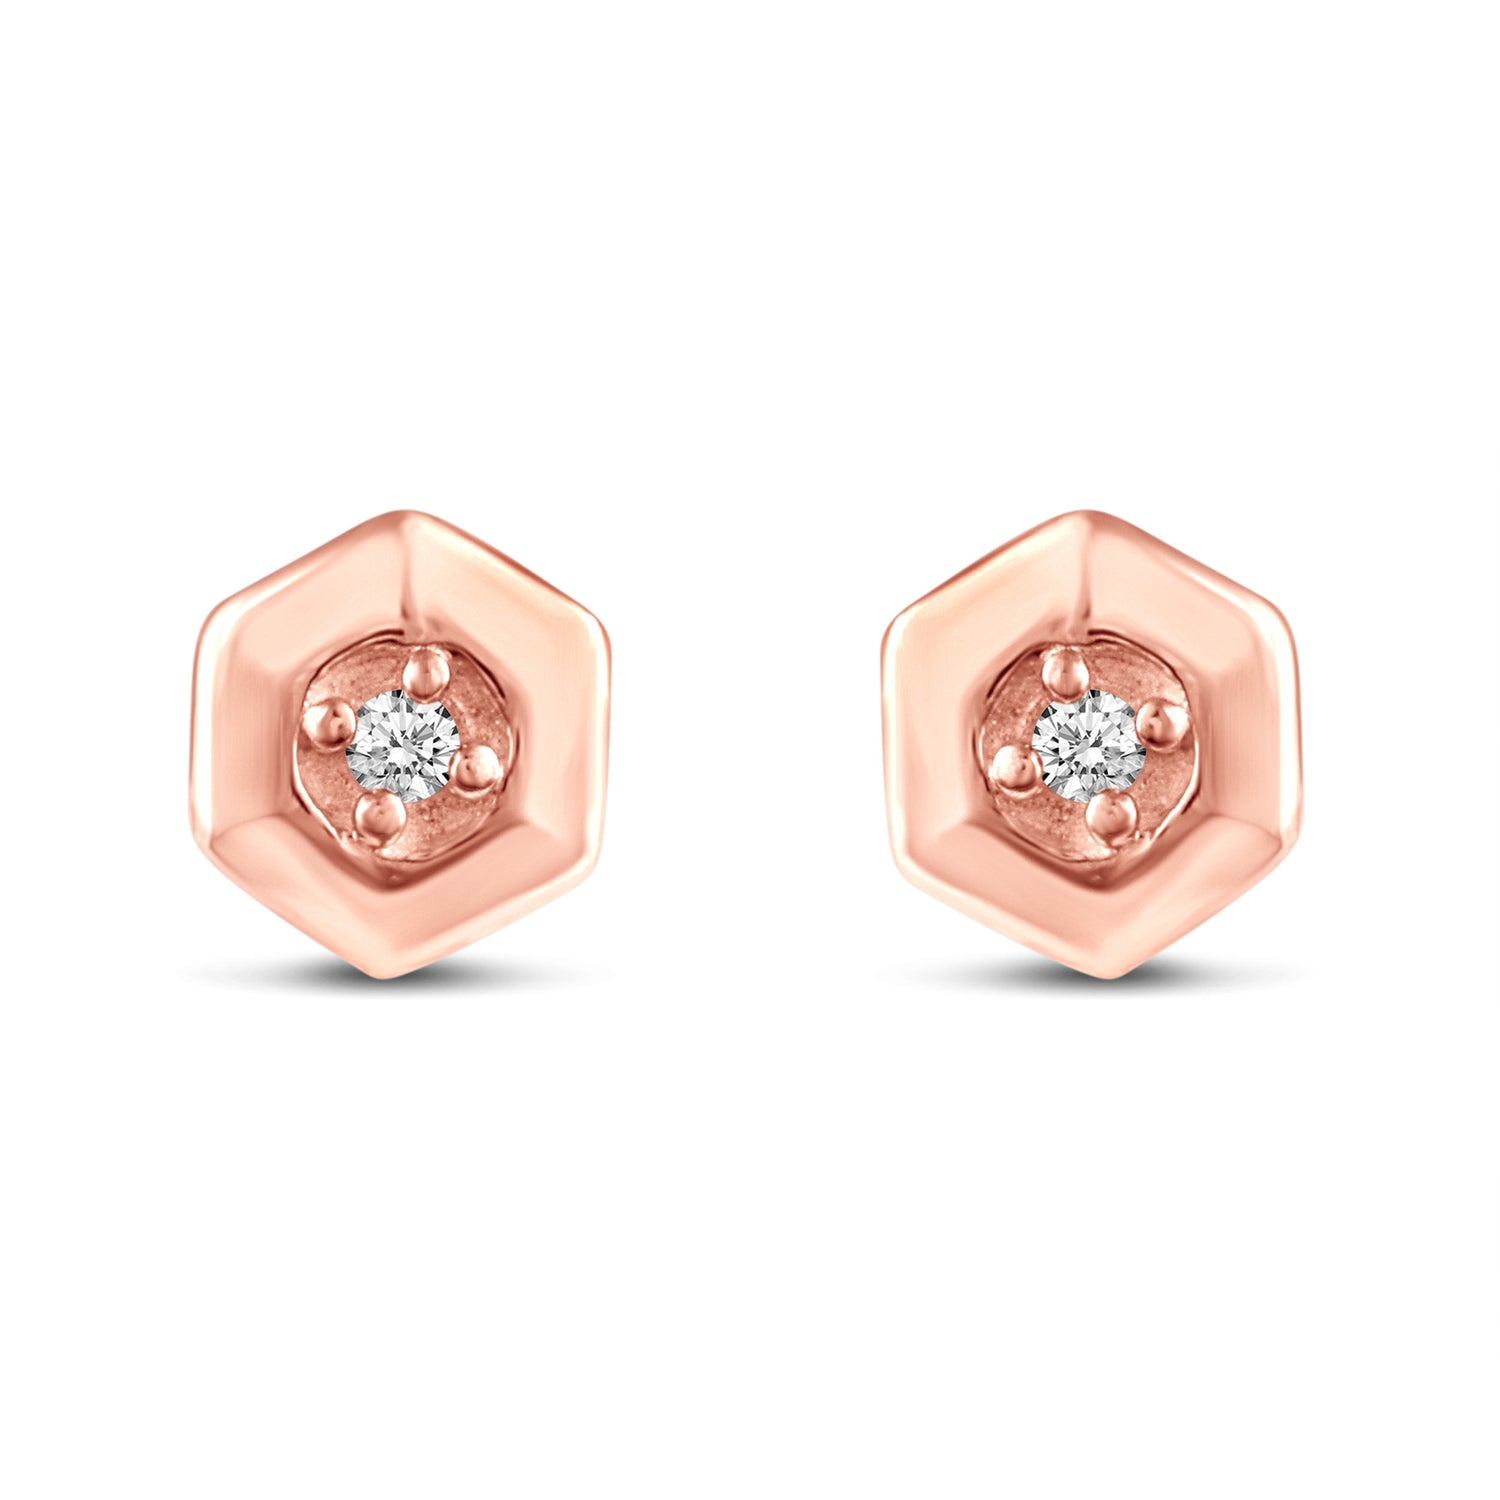 3 Pairs Set Ear Party 1/20 Cttw Natural Diamond Daisy Flower Hexagon Triangle Stud Earrings in 925 Sterling Silver